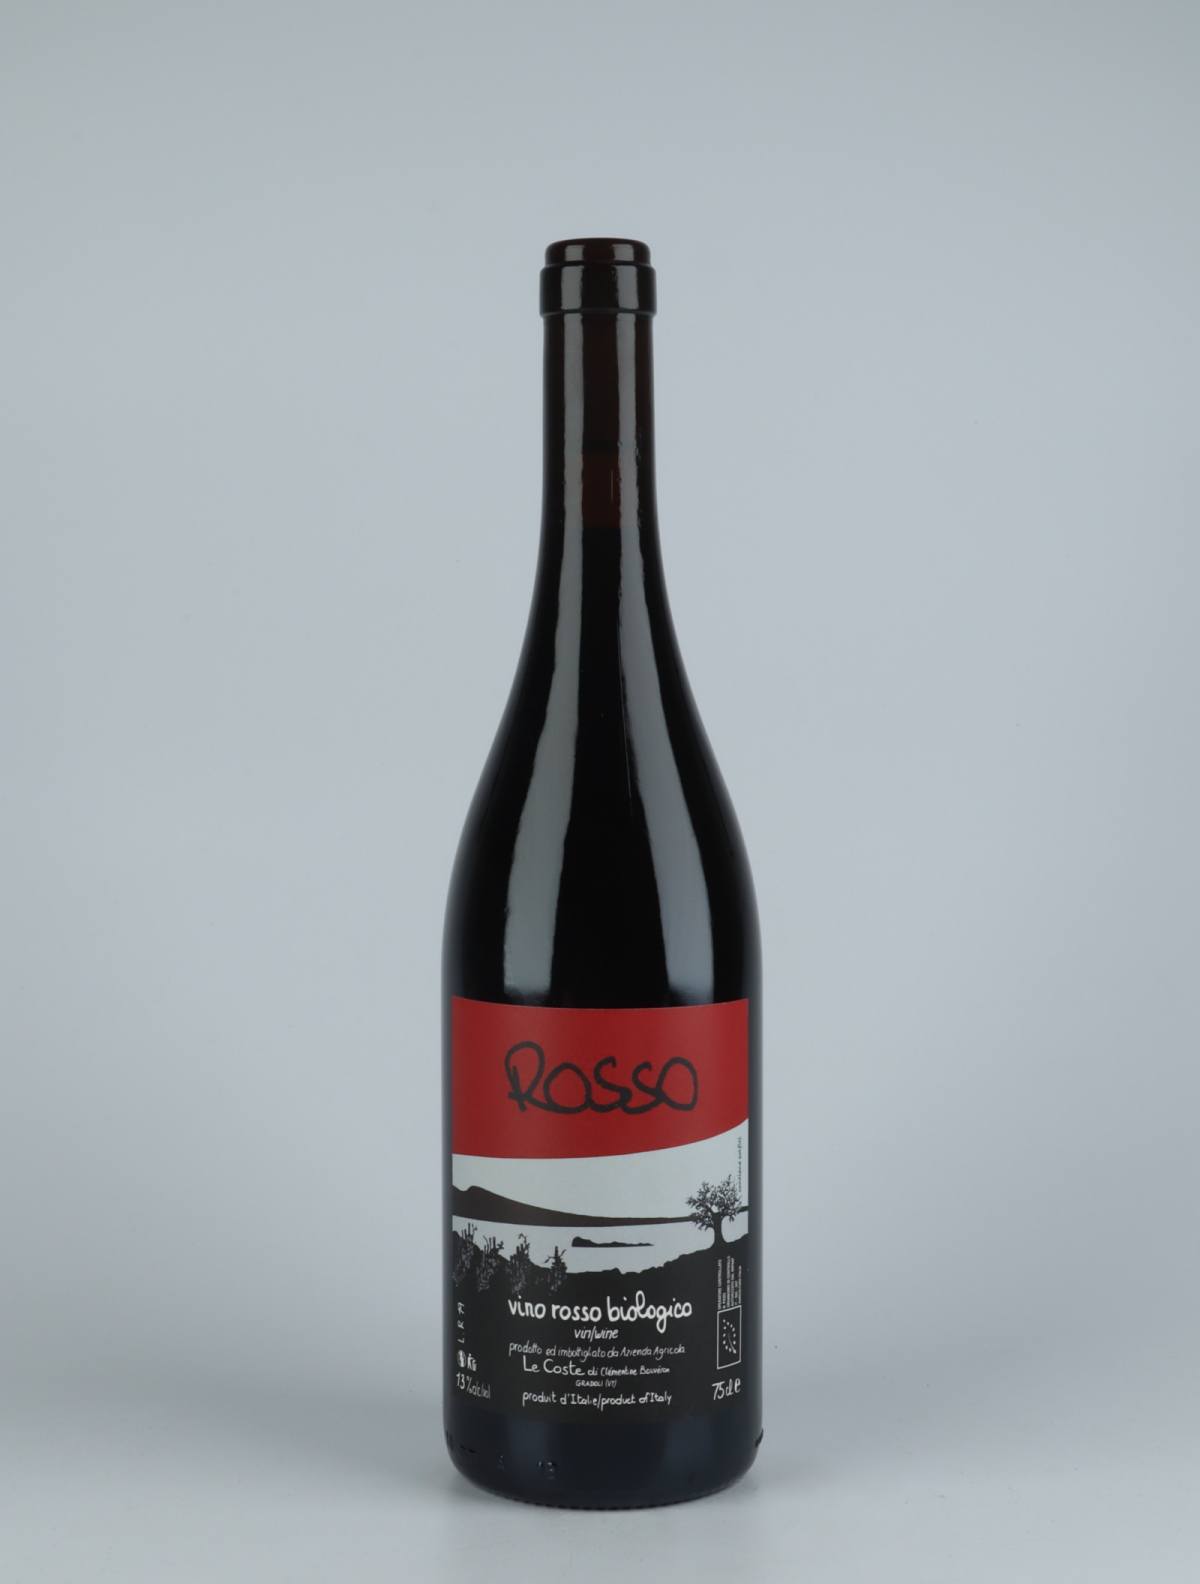 A bottle 2019 Rosso Red wine from Le Coste, Lazio in Italy